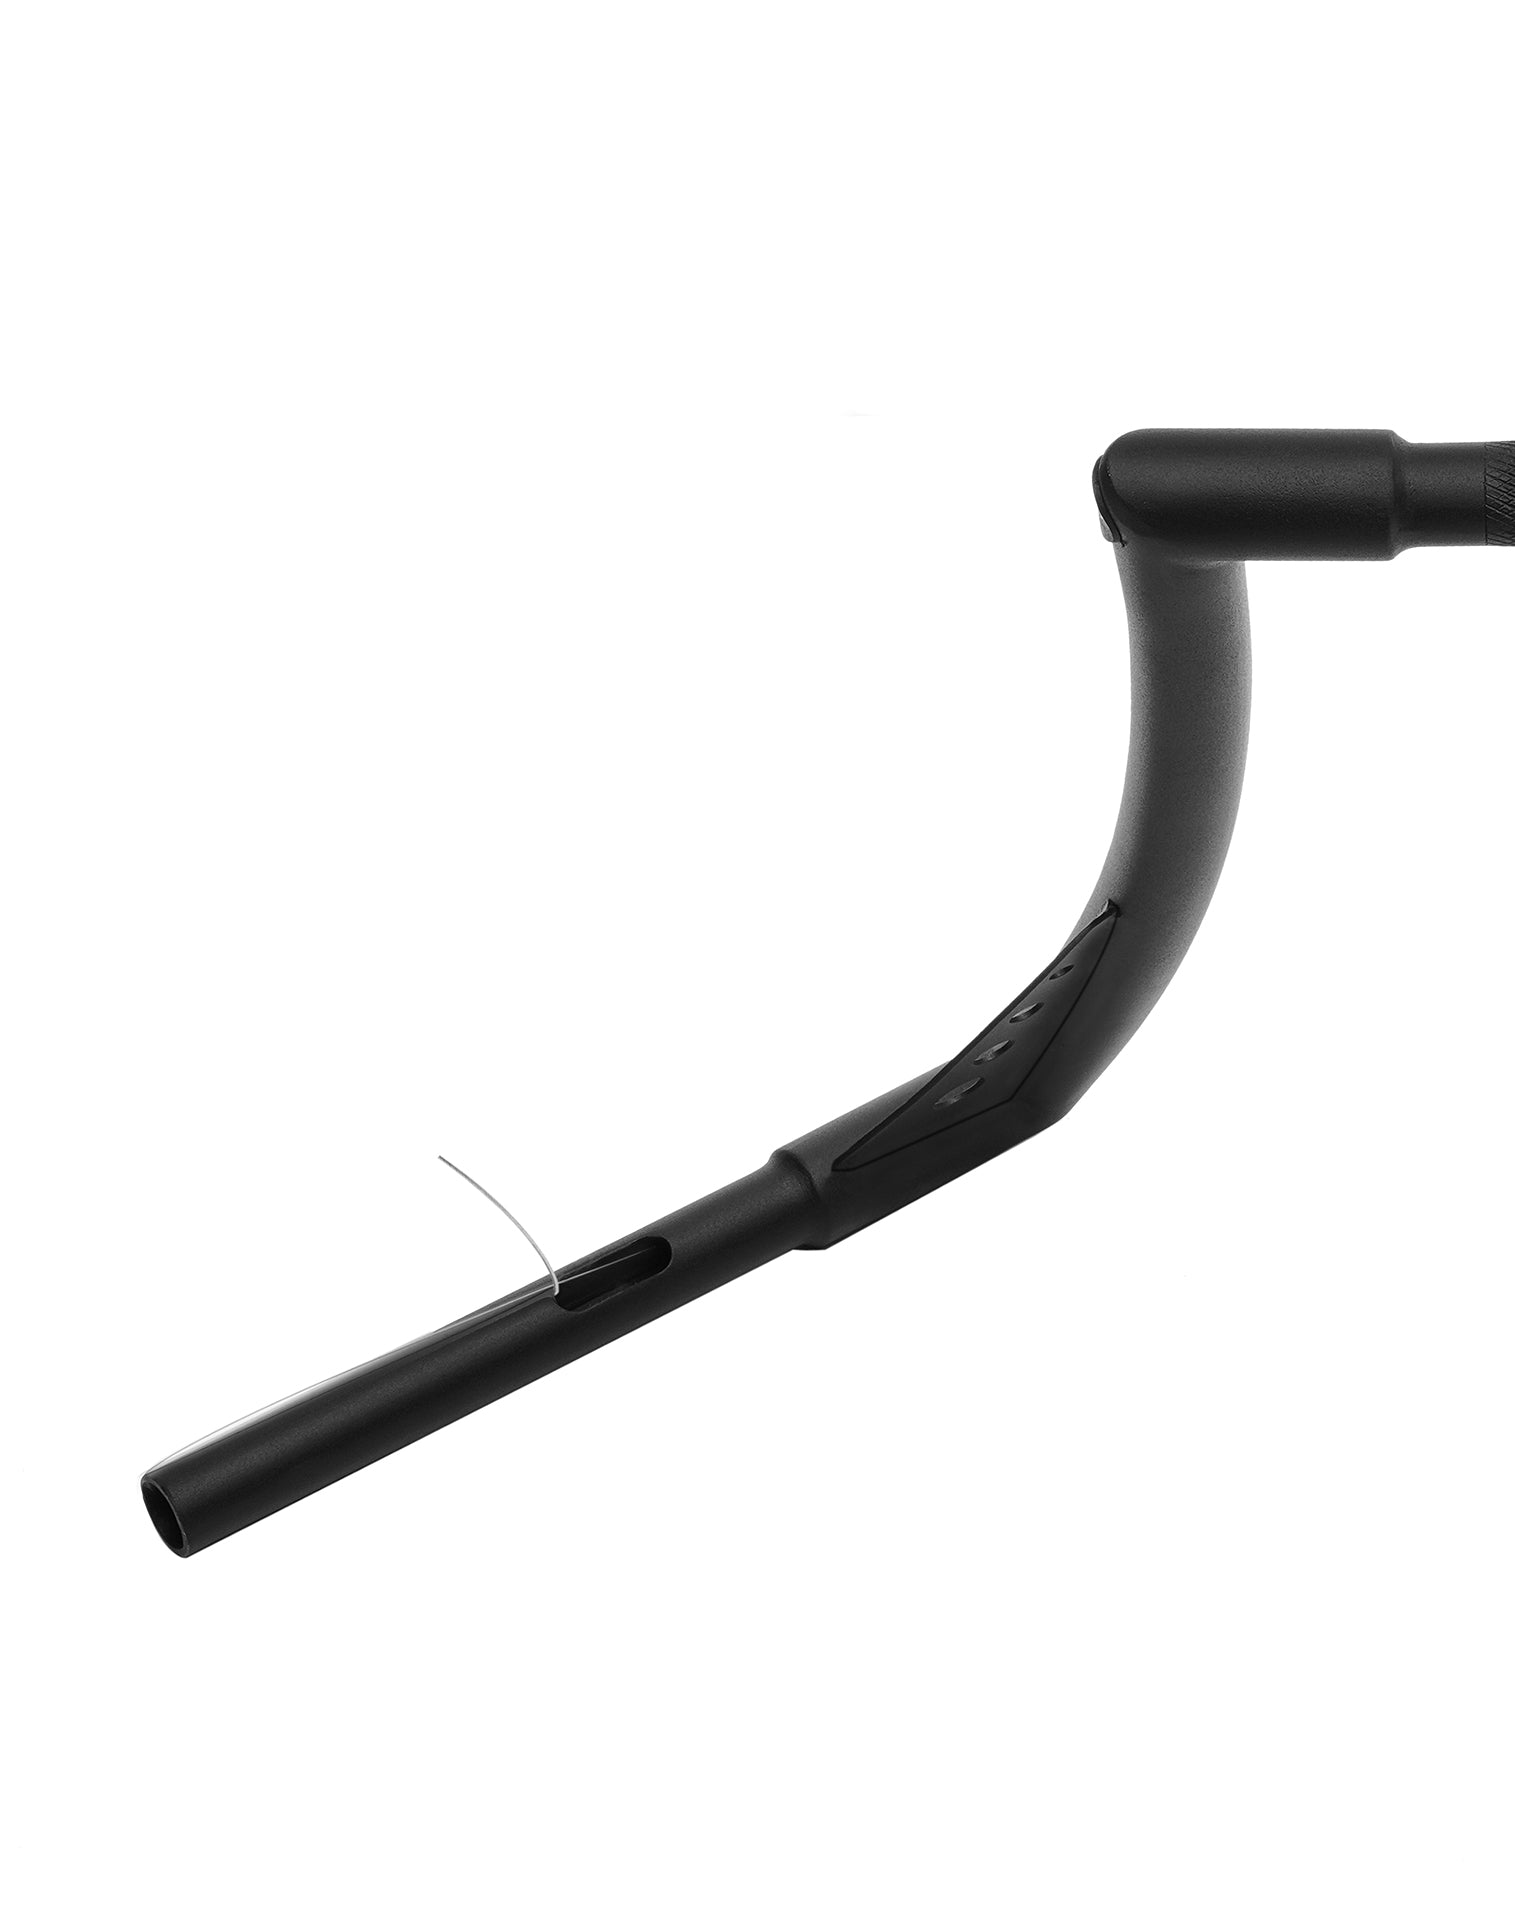 Viking Iron Born 12" Handlebar for Harley Dyna Wide Glide FXDWG Matte Black Close up View